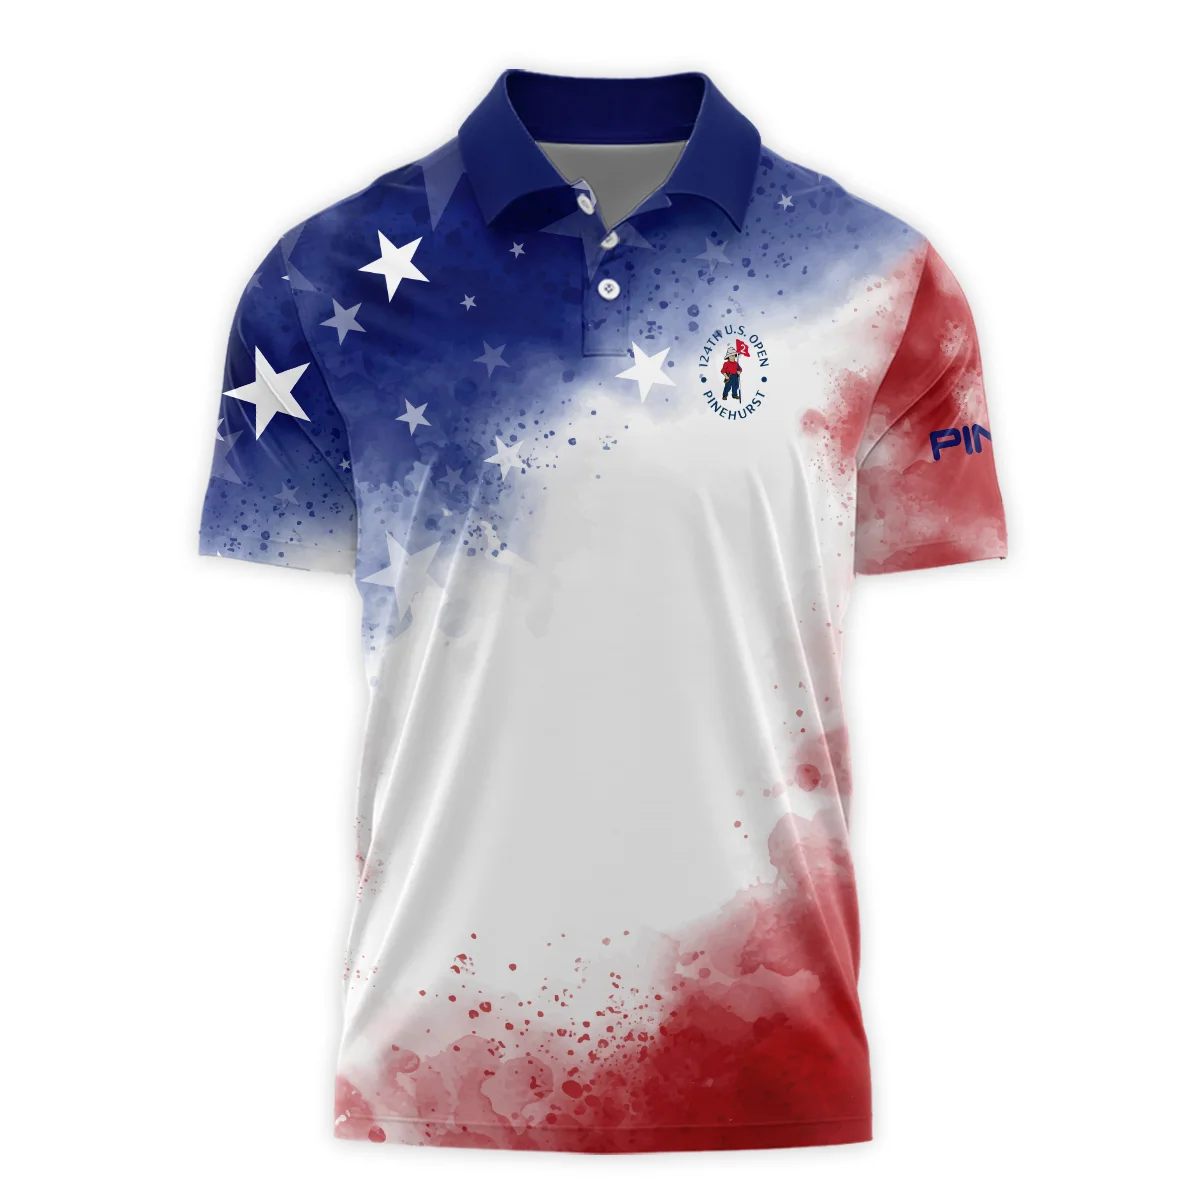 124th U.S. Open Pinehurst Ping Blue Red Watercolor Star White Backgound Vneck Polo Shirt Style Classic Polo Shirt For Men